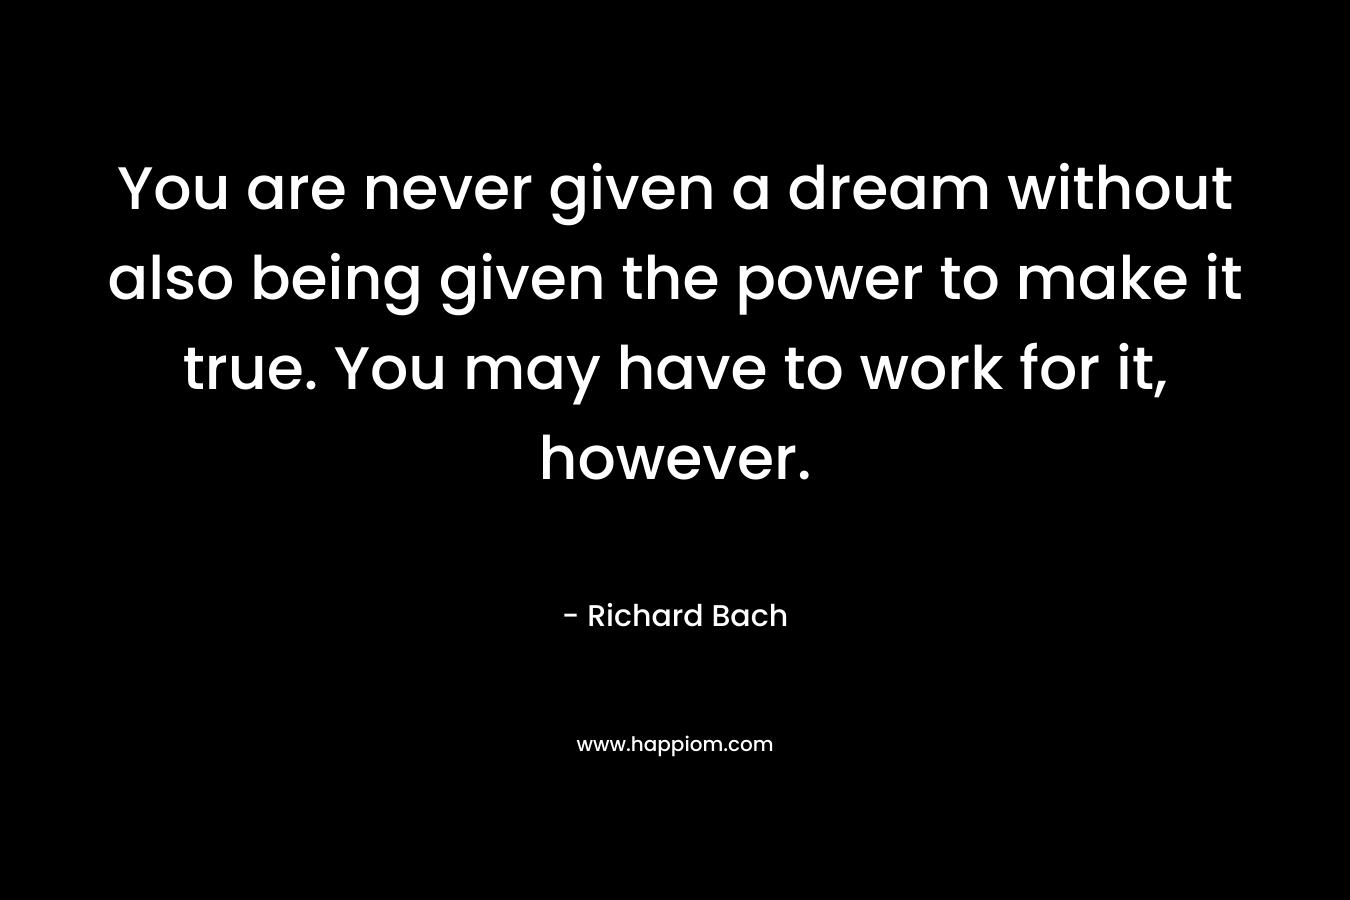 You are never given a dream without also being given the power to make it true. You may have to work for it, however. – Richard Bach